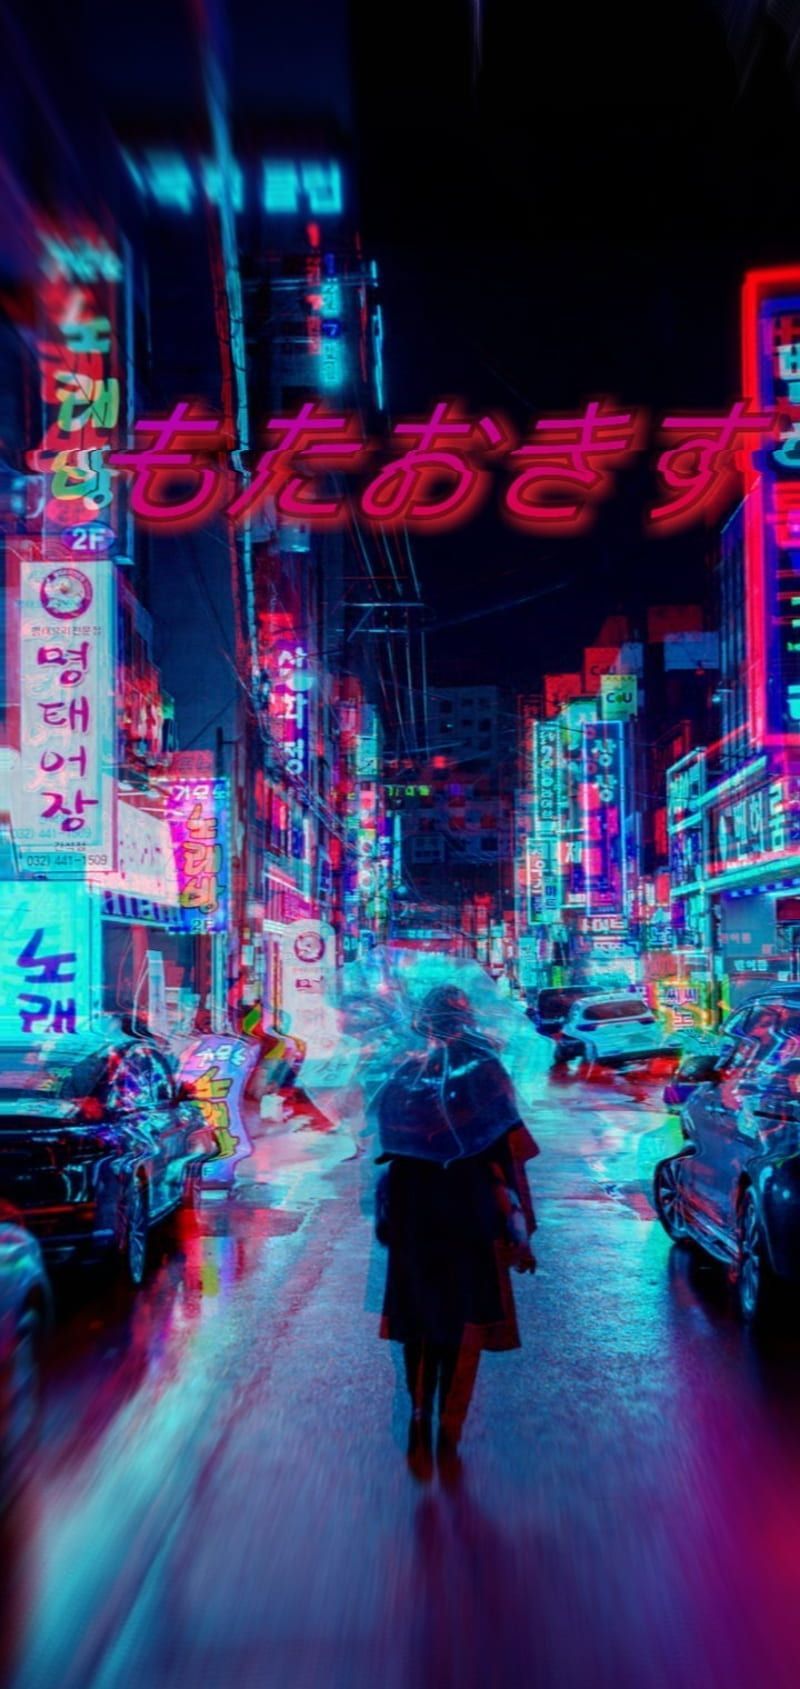 Aesthetic cyberpunk city wallpaper for your phone - Tokyo, Japanese